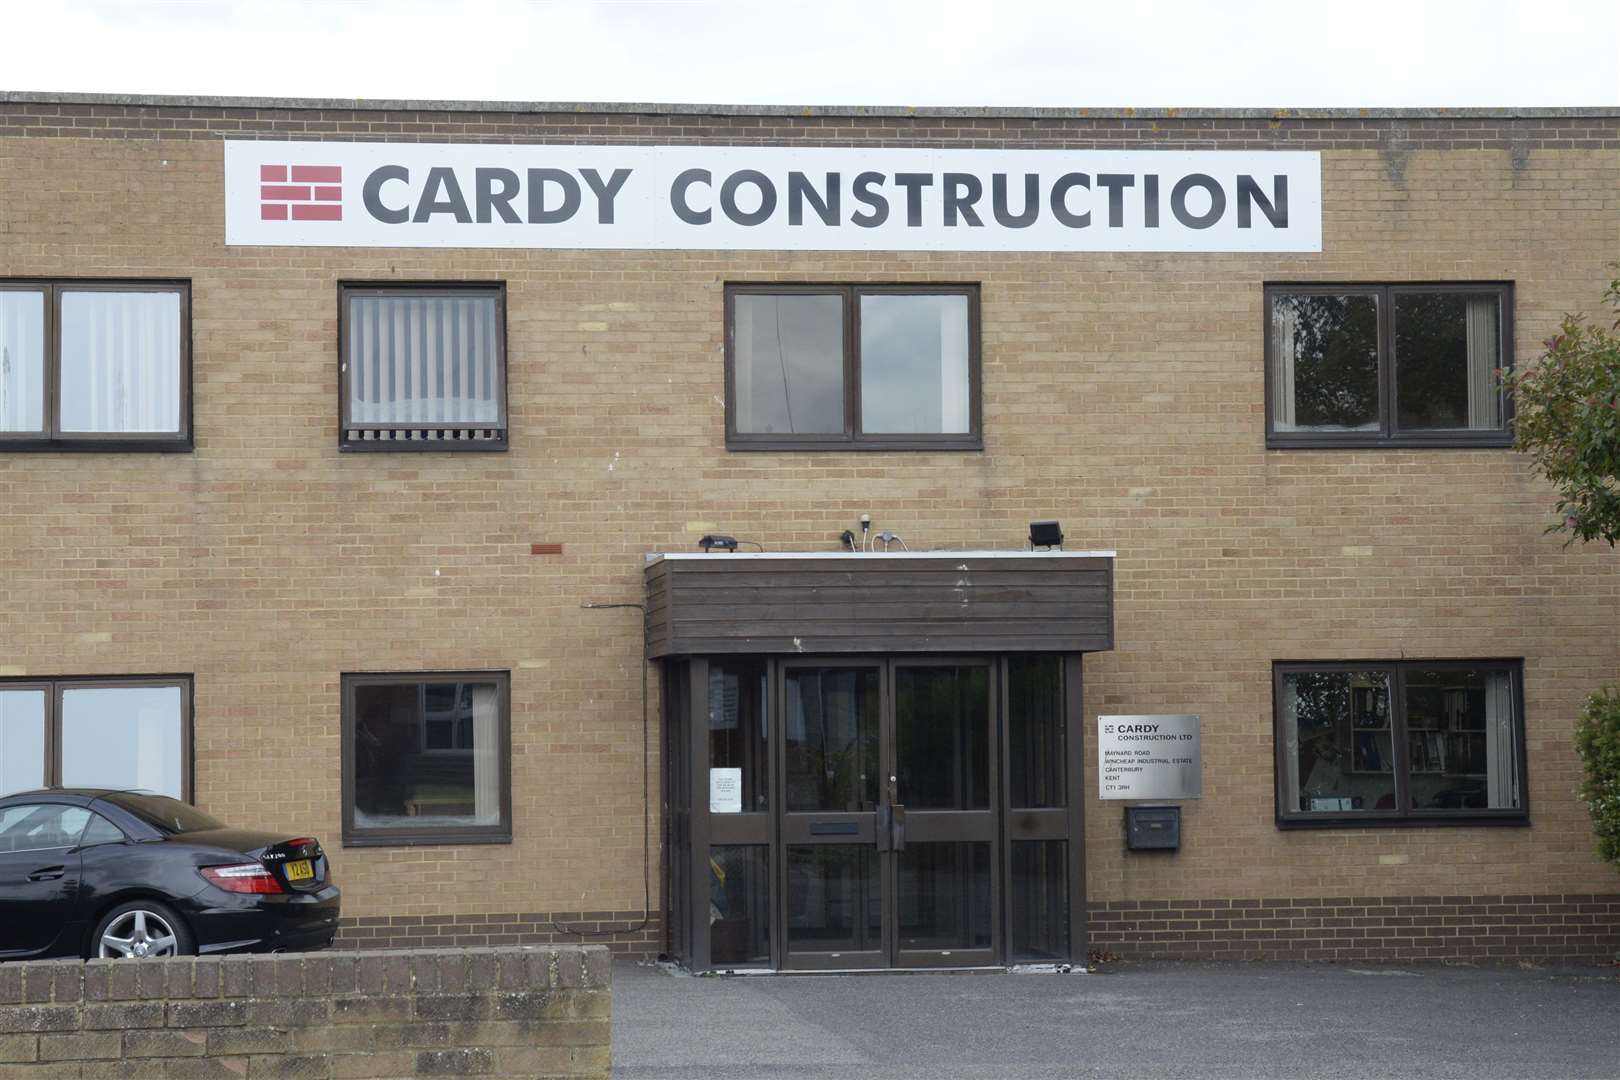 Cardy Construction's offices in Canterbury